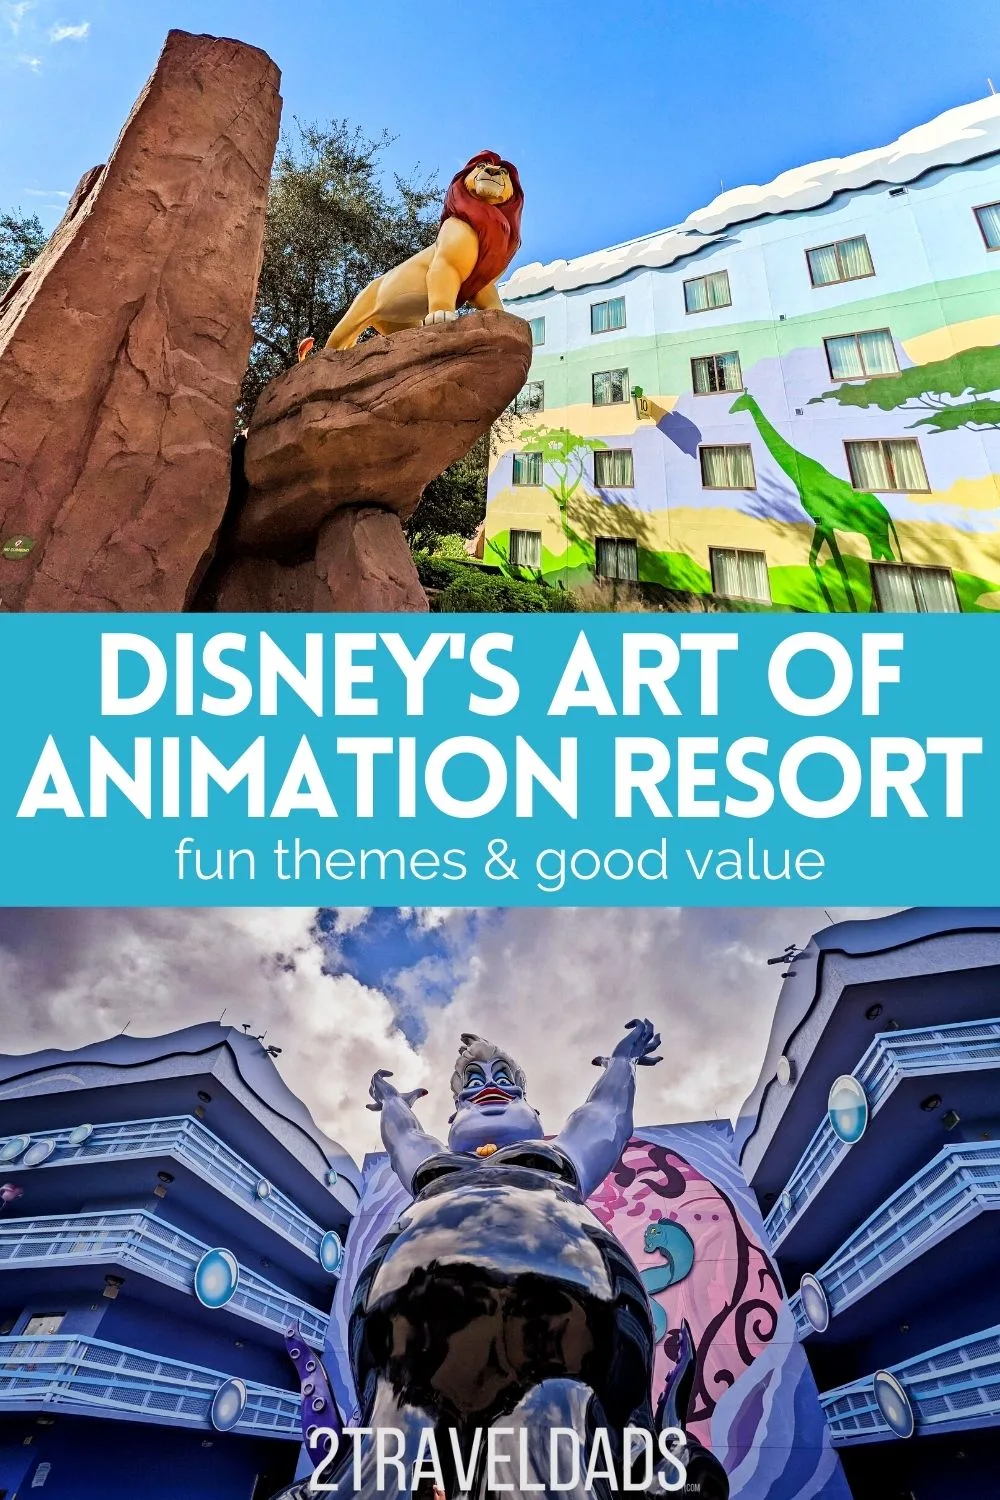 Review of Disney's Art of Animation Resort includes Cars, Lion King, Finding Nemo and Little Mermaid themed suites and rooms. A fun family hotel, Art of Animation is a Value Level Walt Disney World resort and is ideal for families visiting on a budget (or not).